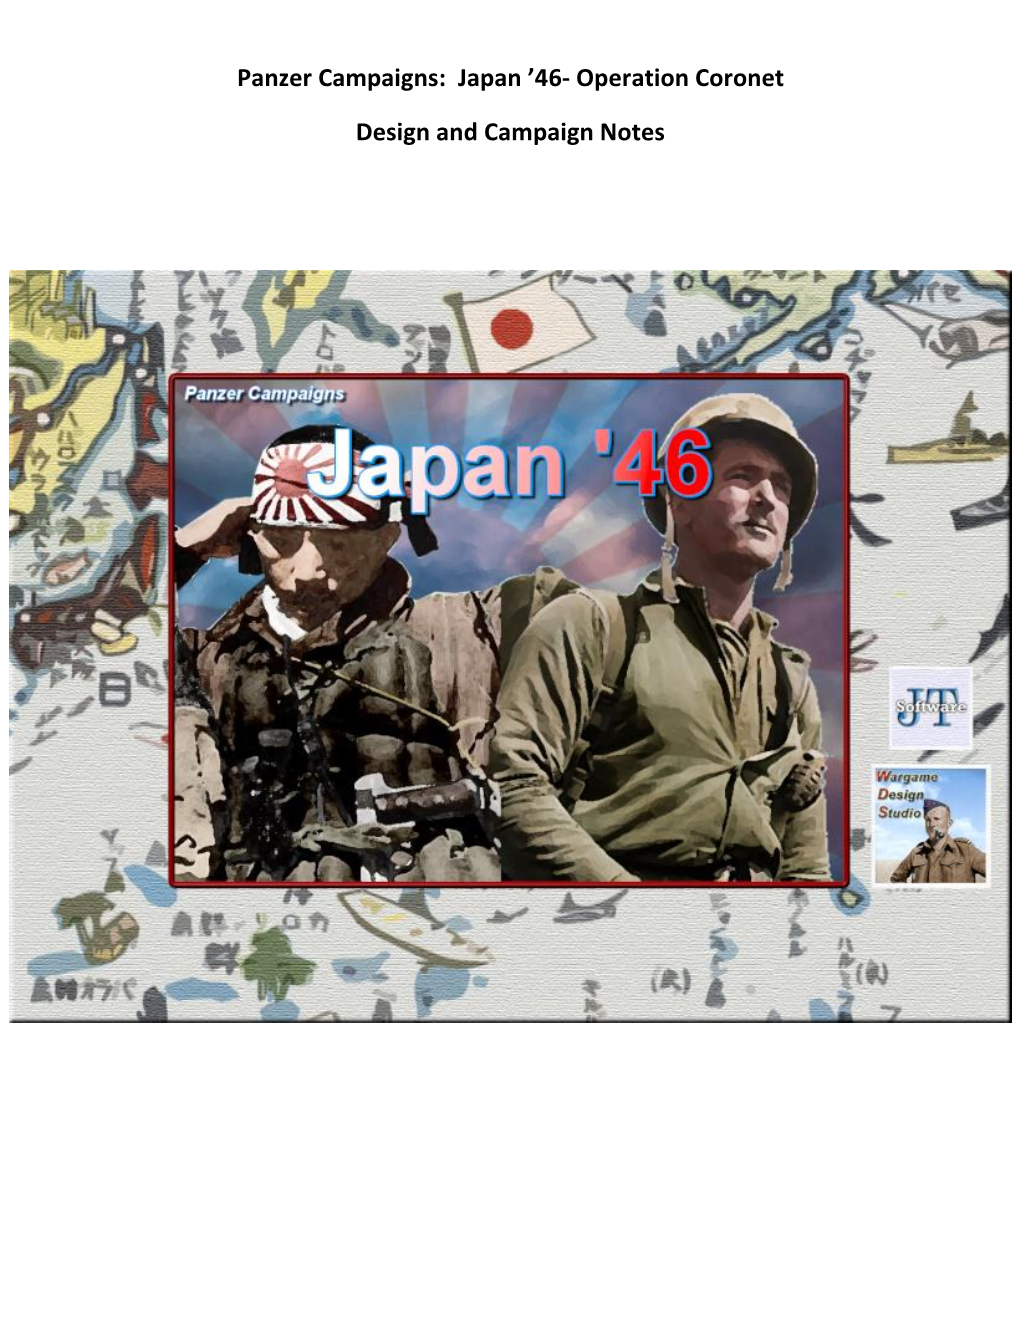 Japan '46- Operation Coronet Design and Campaign Notes